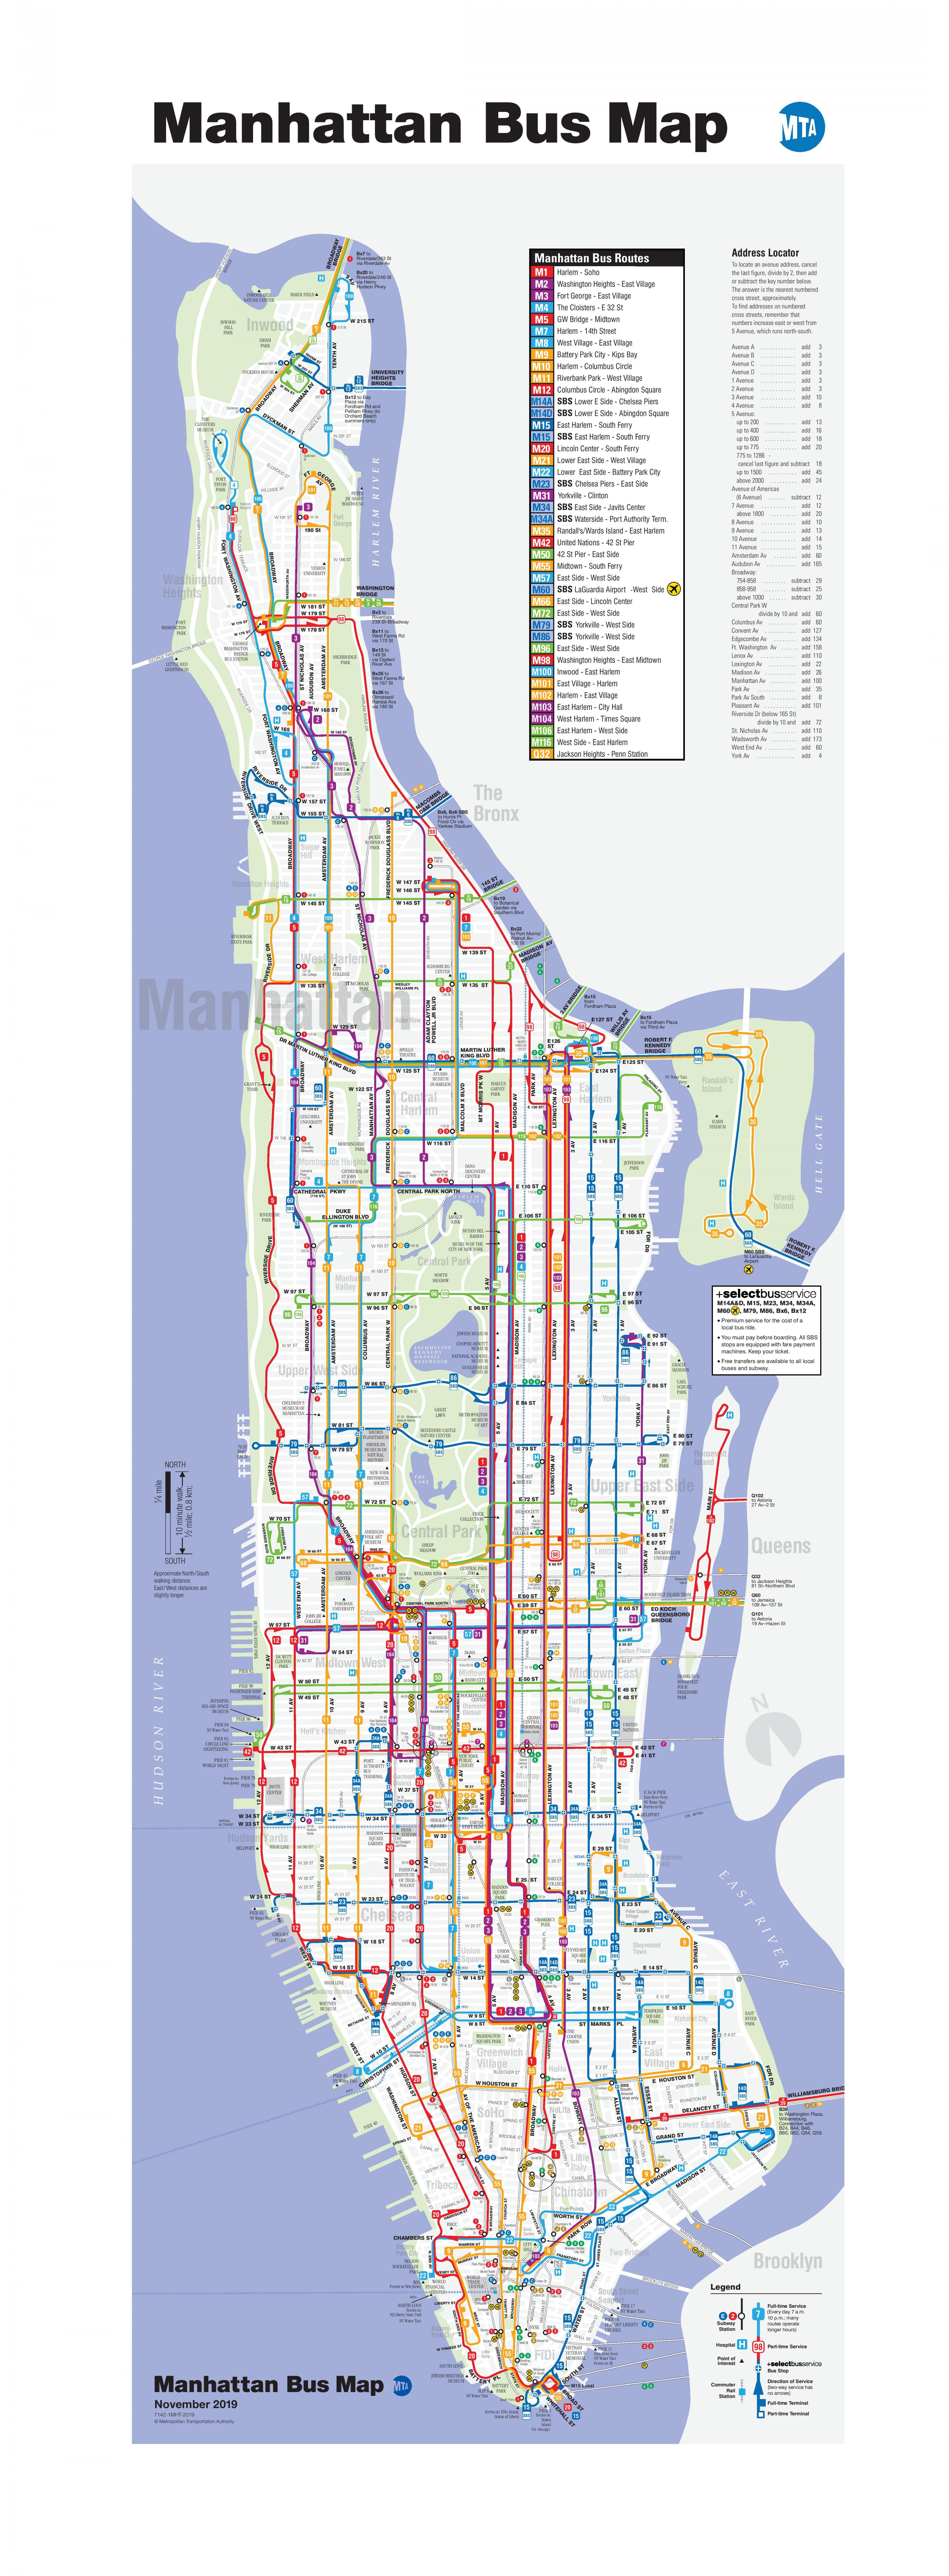 New York bus map - NYC bus route map (New York - USA)